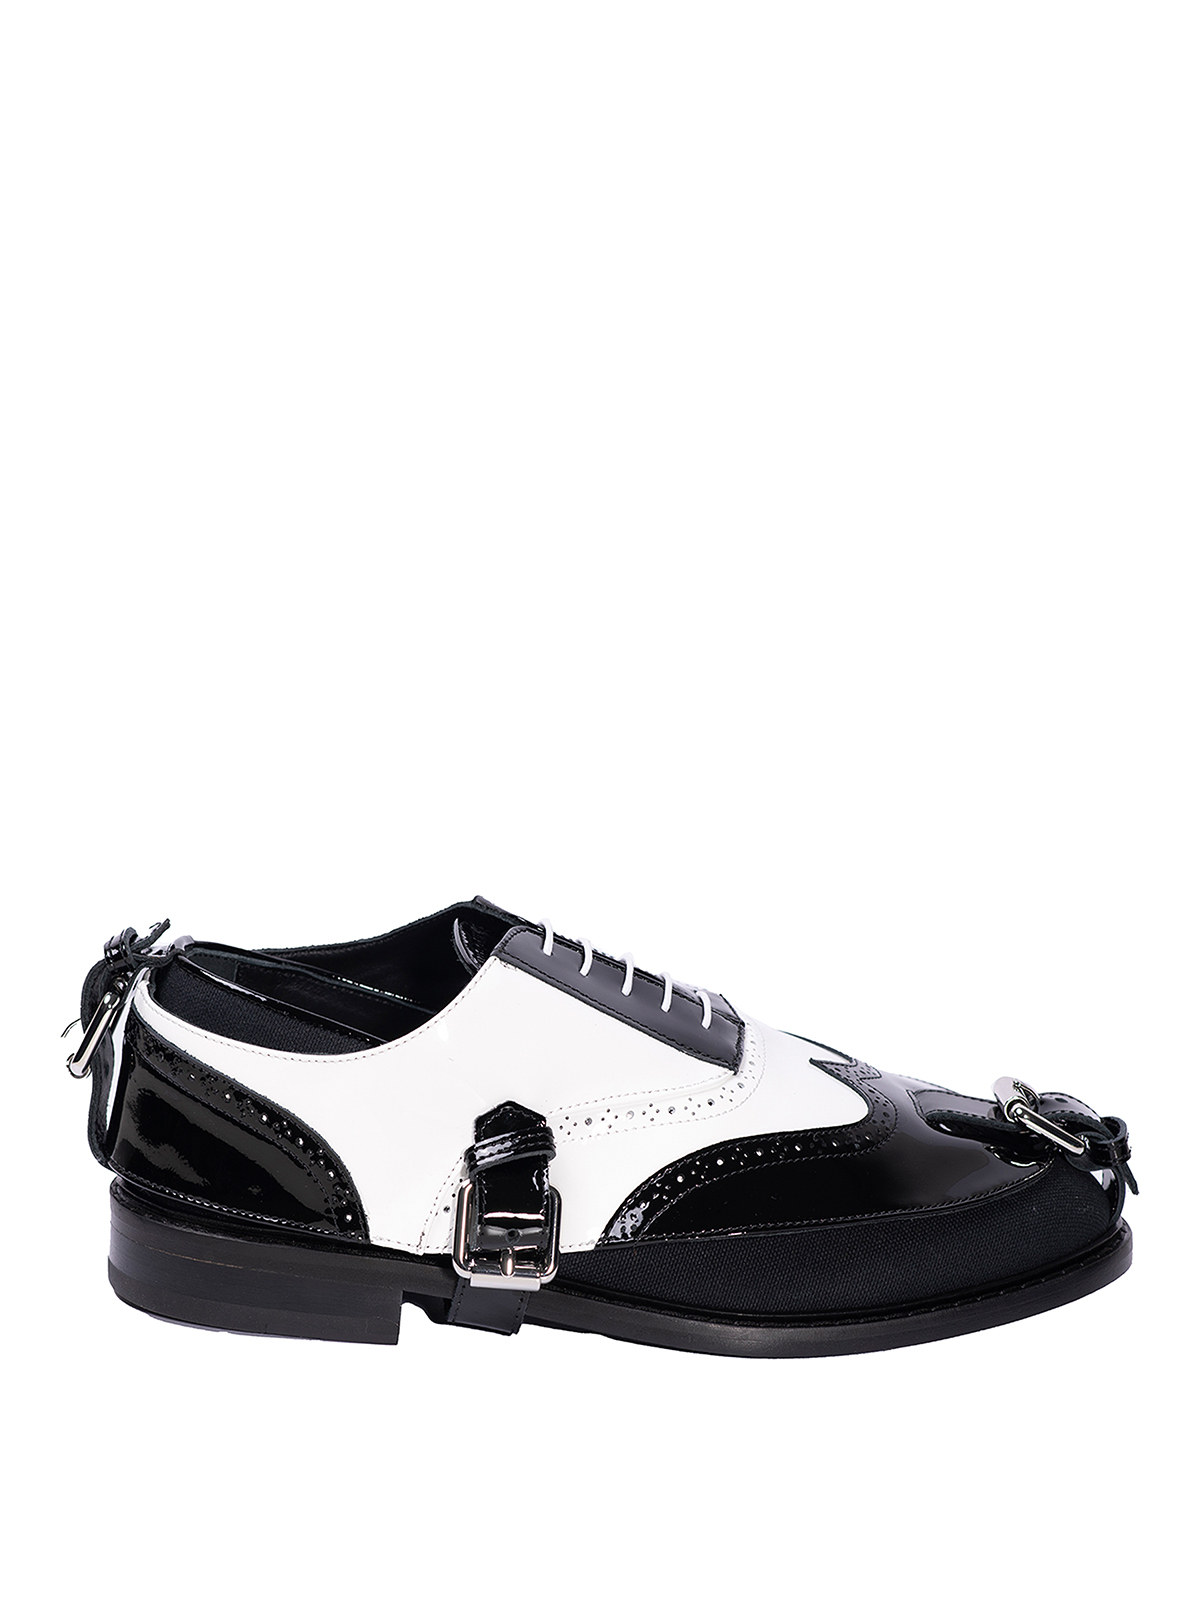 Moschino Spats Oxford Shoes In Negro